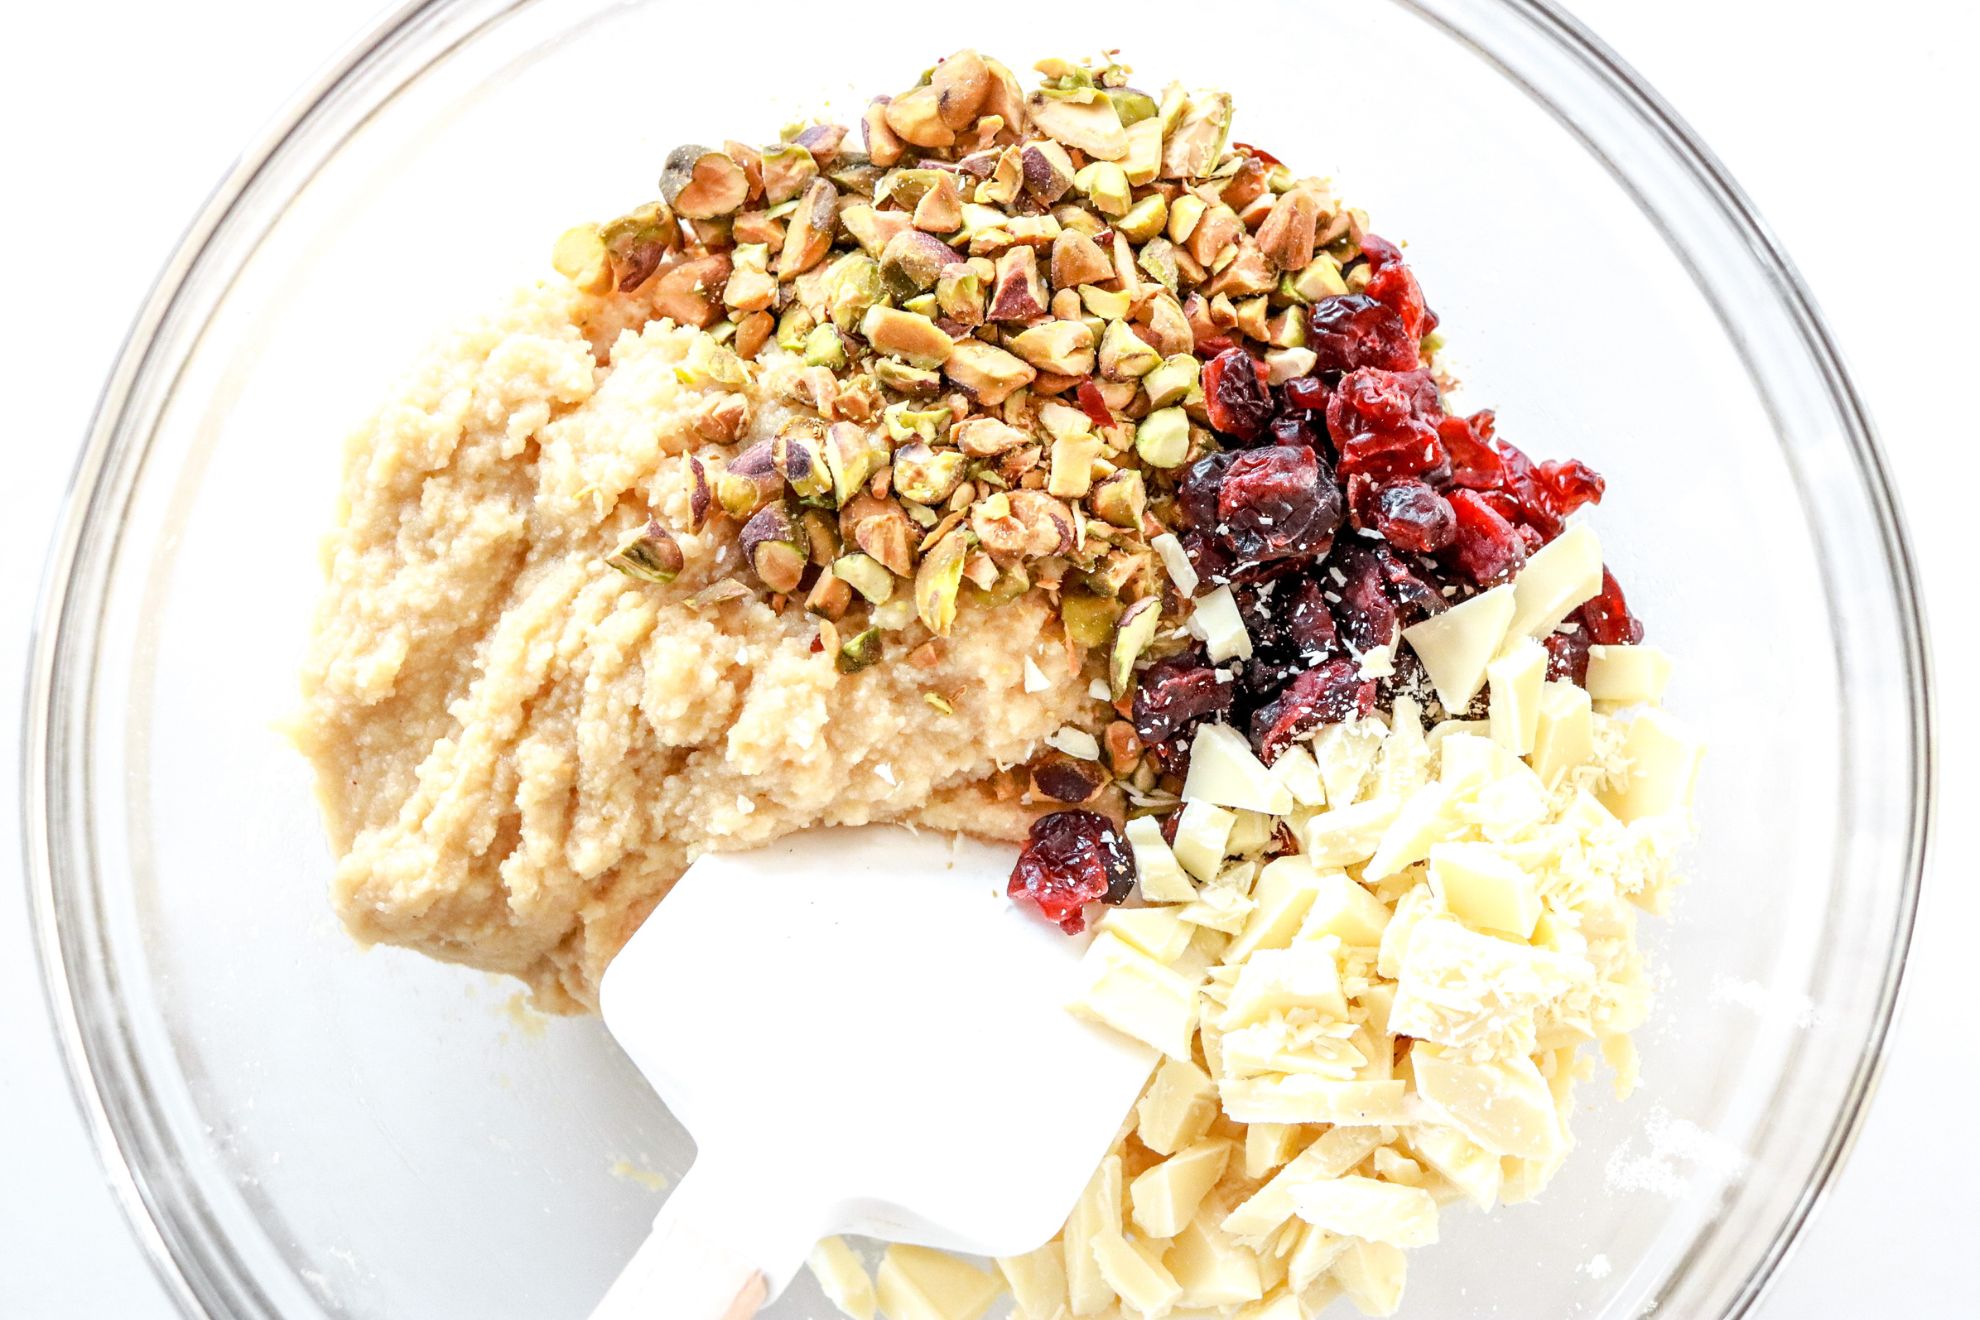 This is an overhead horizontal image of a glass bowl with raw cookie dough in it. On top of the dough are pistachio pieces, dried cranberries and white chocolate chunks. A spatula is dipping into the bowl. The bowl sits on a white surface.